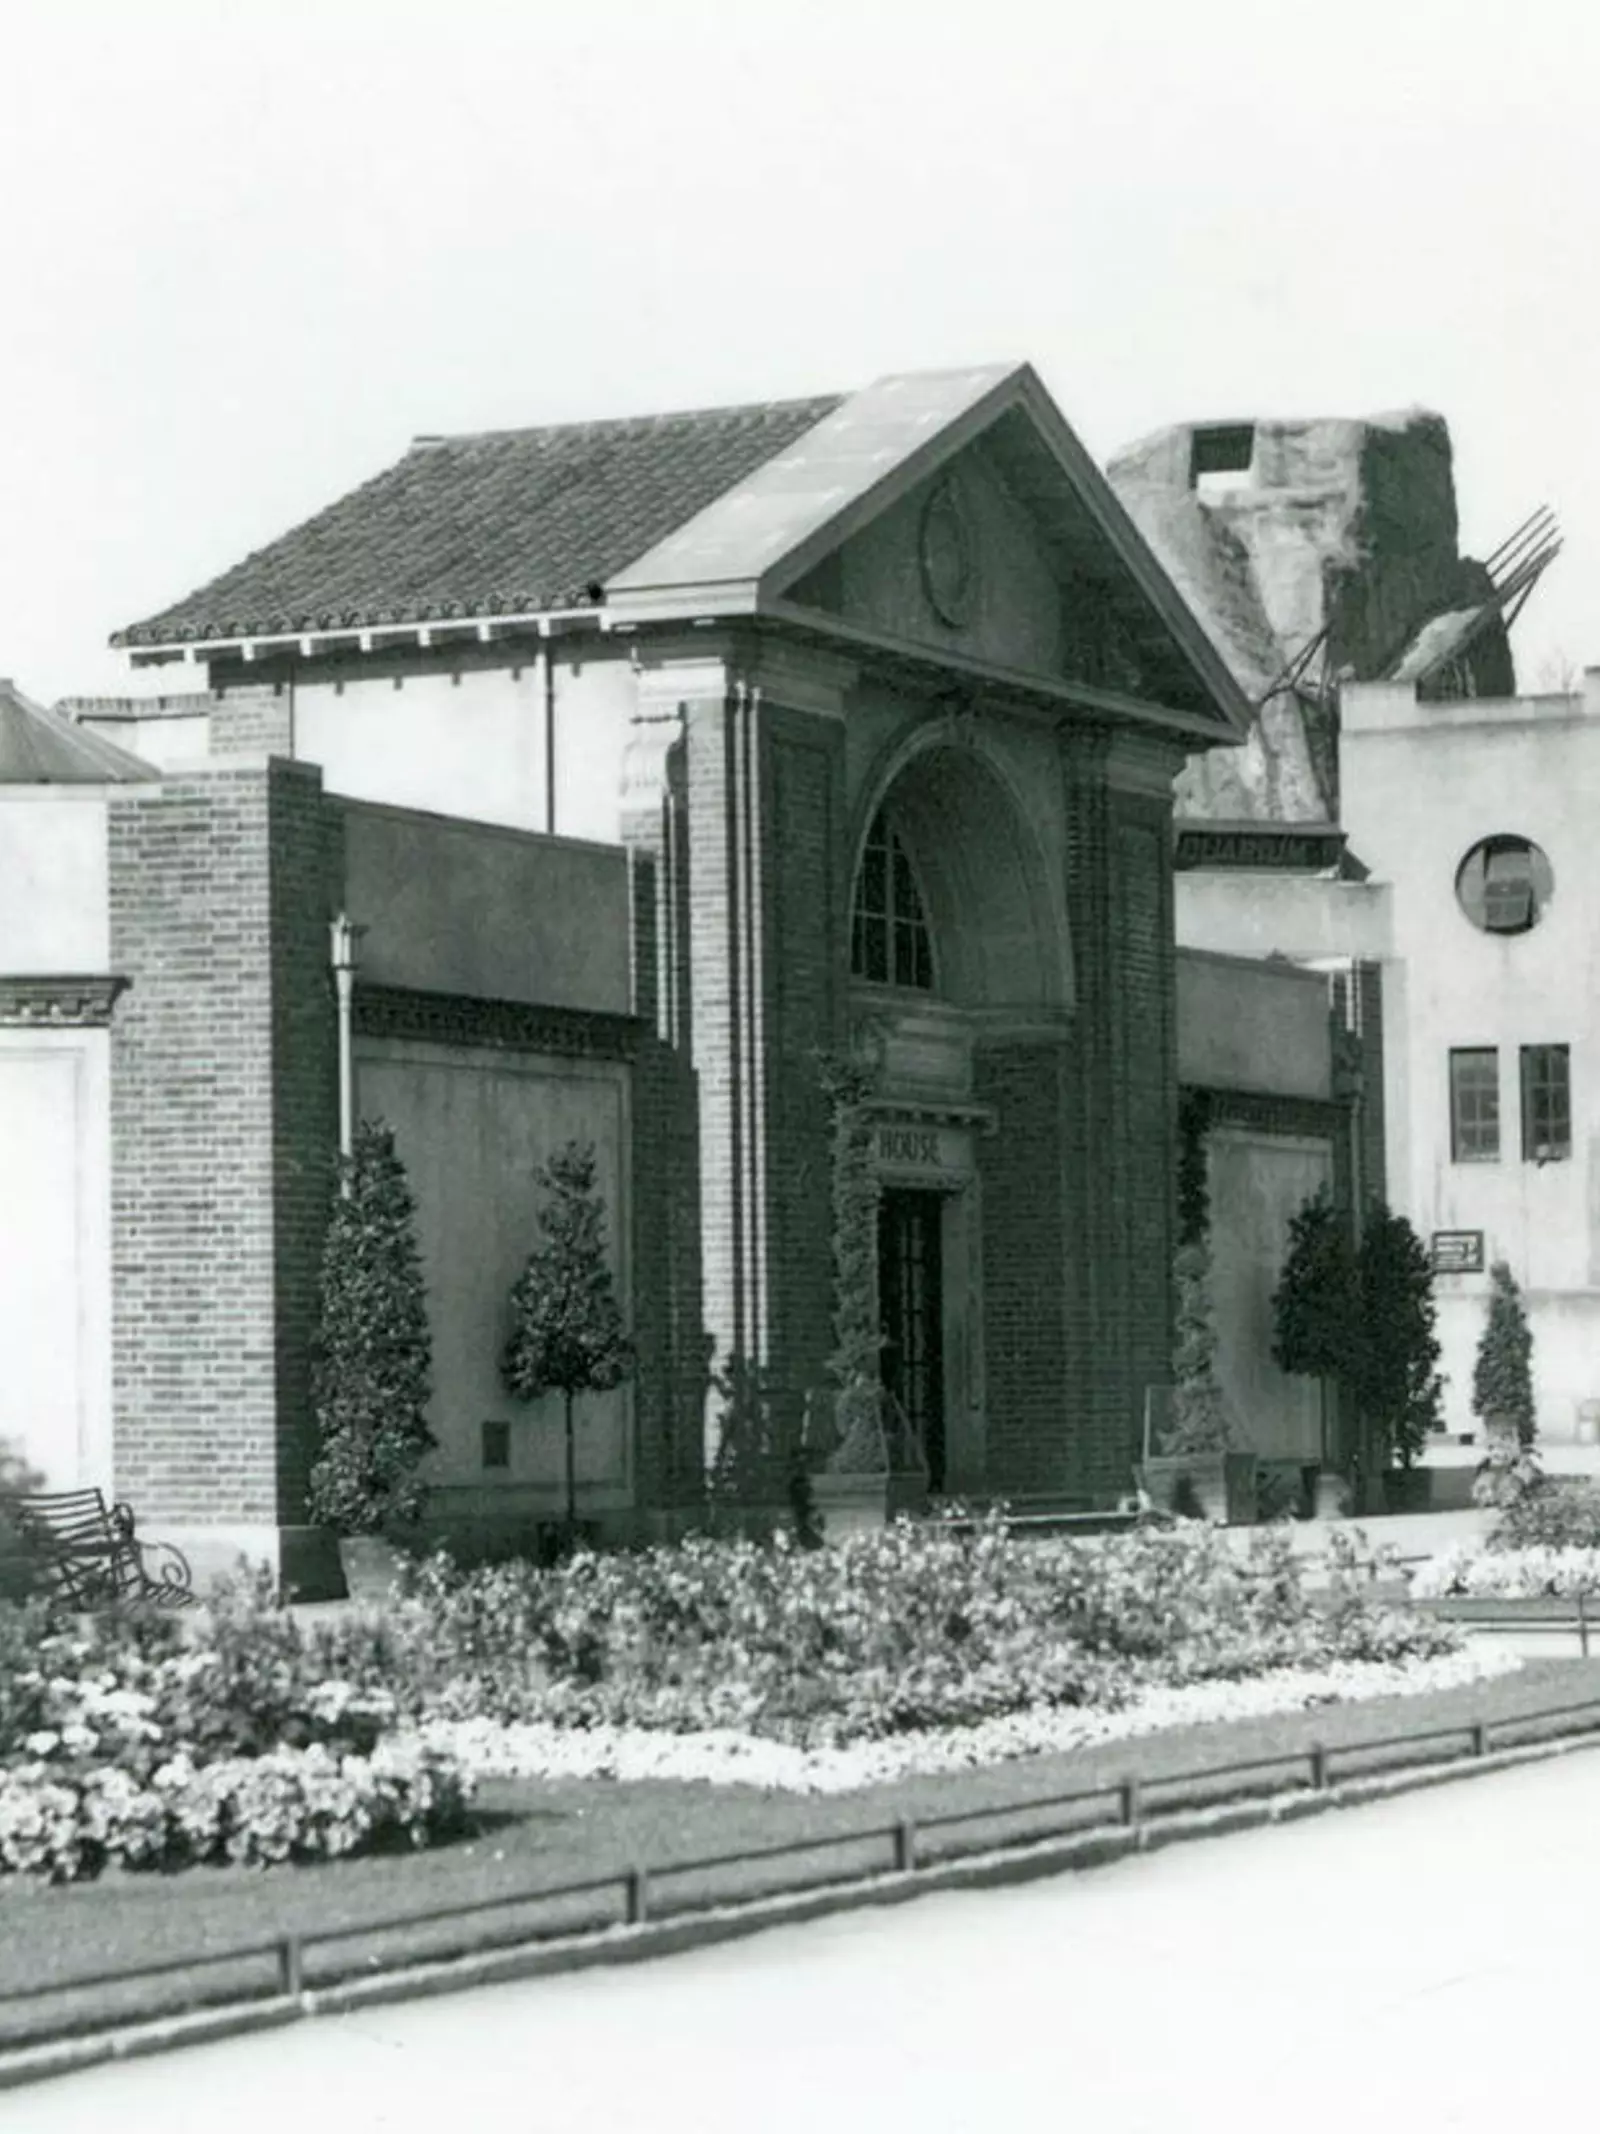 The Reptile House at London Zoo in 1928 with formal flower beds along the paths to the entrance. 